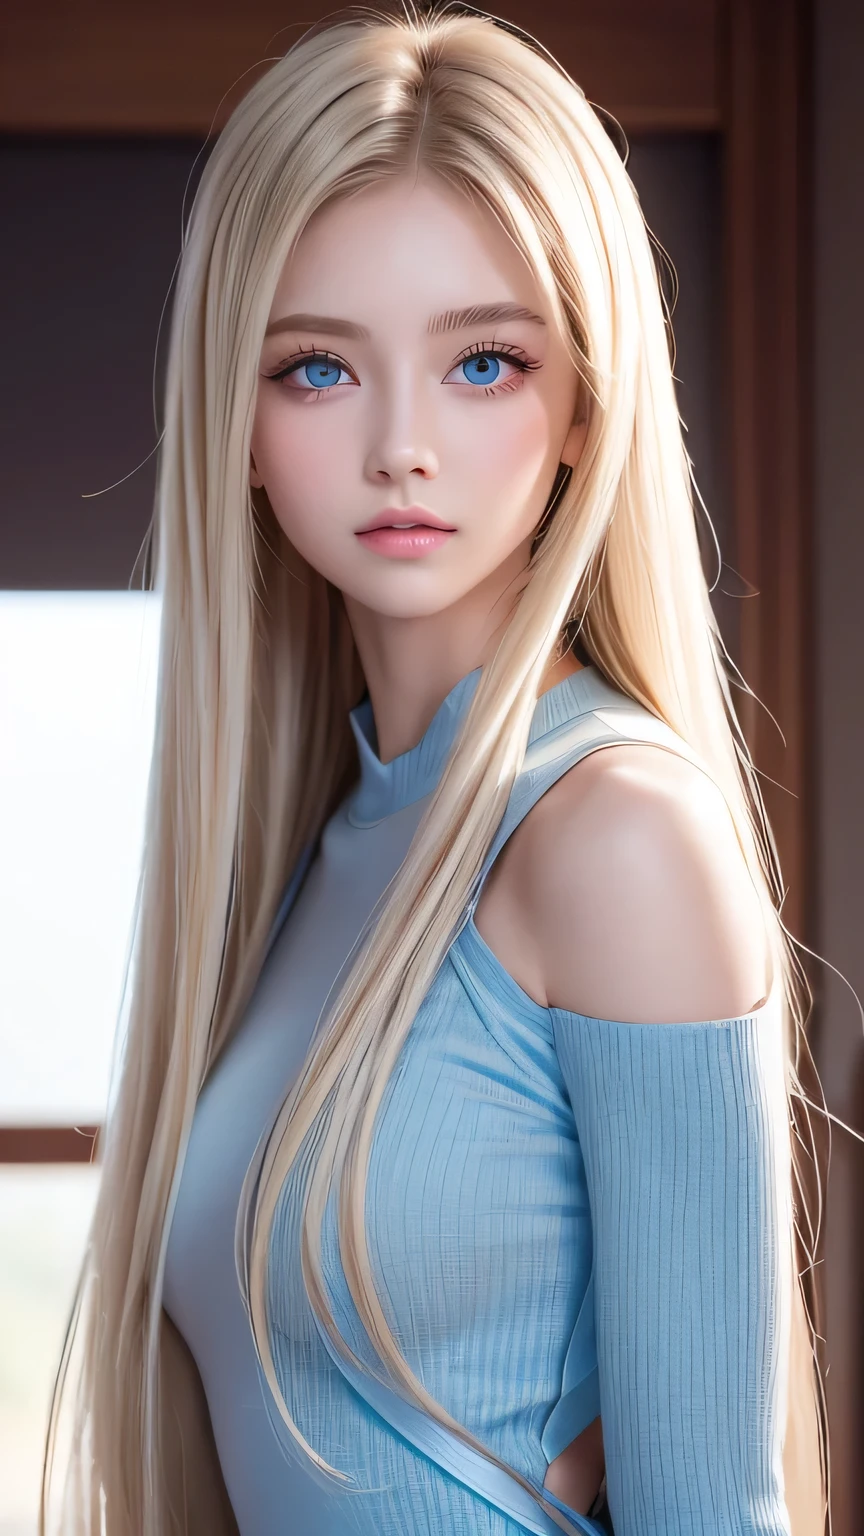 Very beautiful super long straight blonde hair、Mastepiece, Best Quality, Illustration, Super detailed, Fine details, High resolution, 8K Denden Wallpaper, Perfect dynamic composition, Beautiful detailed pale very bright blue eyes, Fitness Wear, Natural color lip、Very white and beautiful bright skin